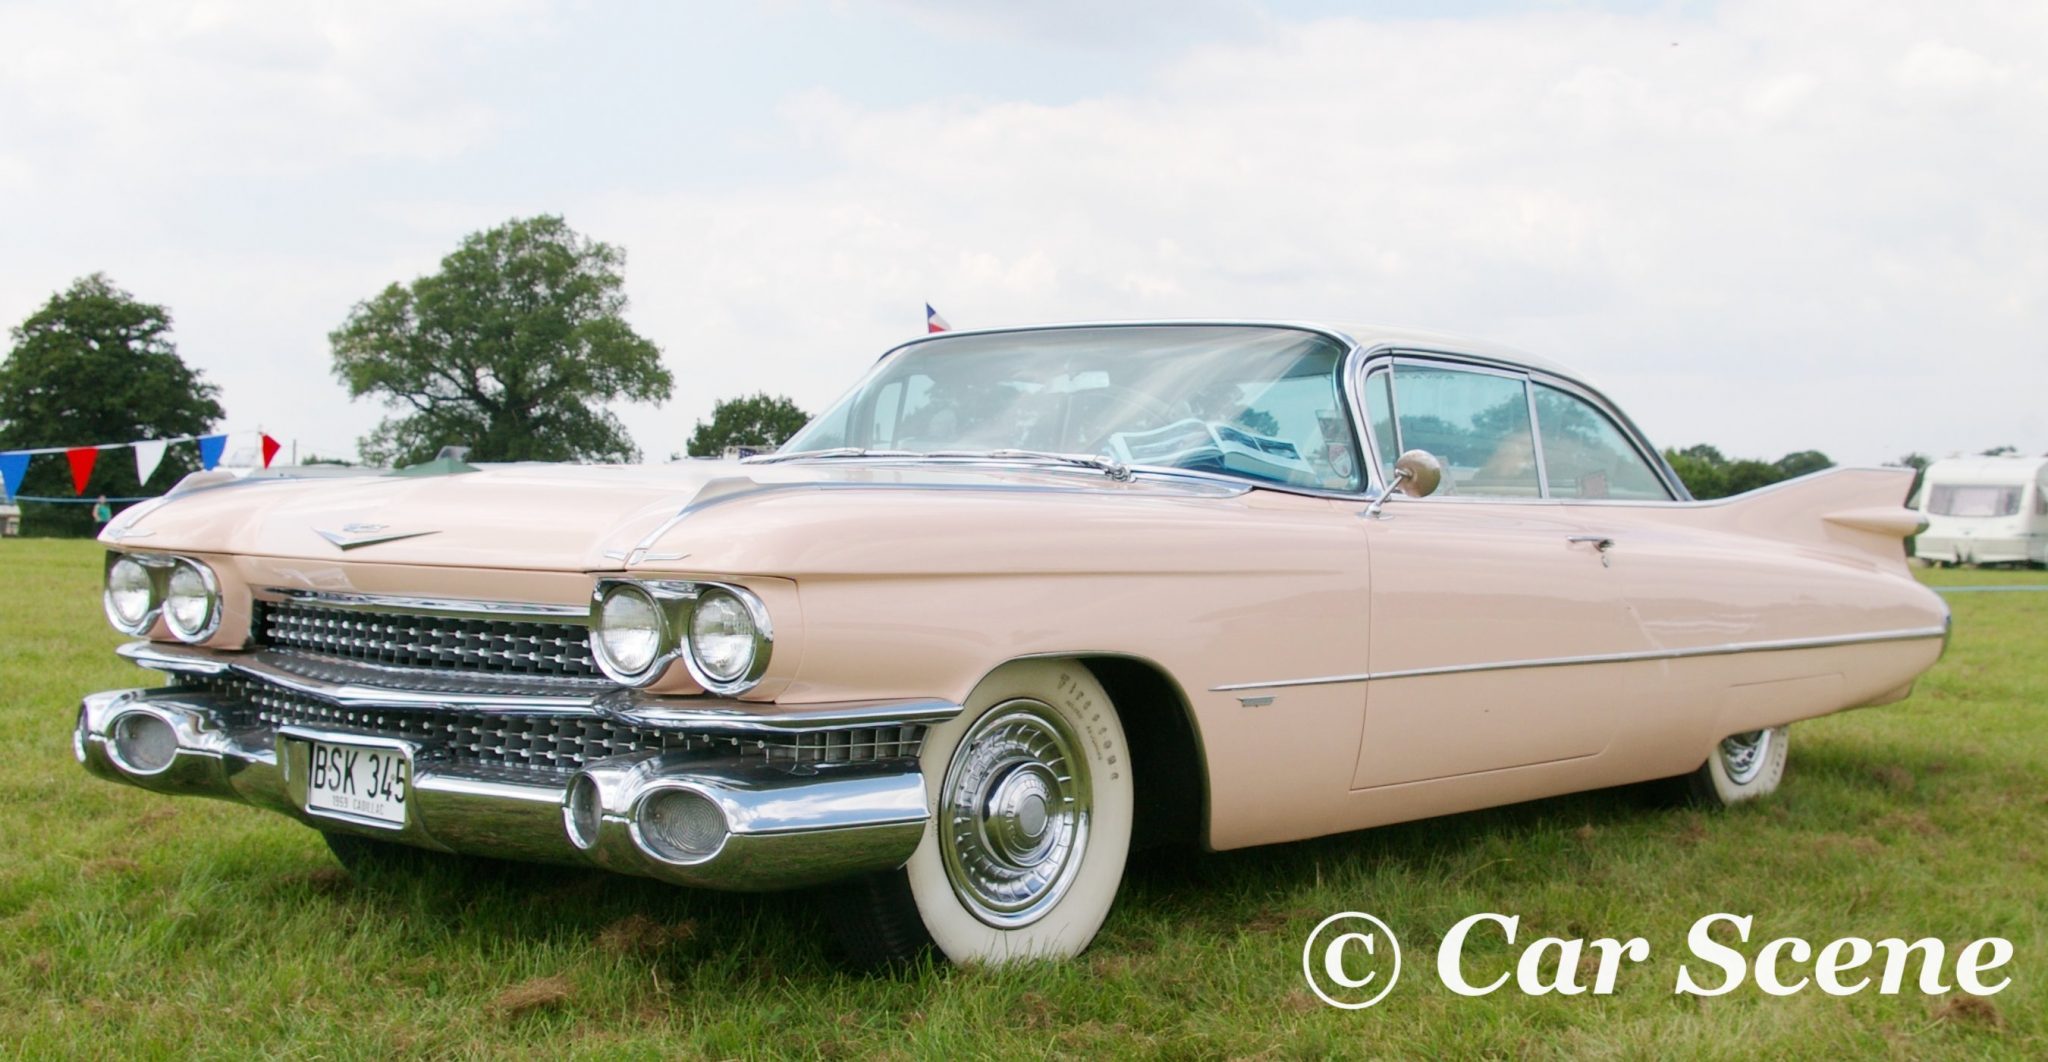 1959 Cadillac Series 62 Coupe front three quarters view